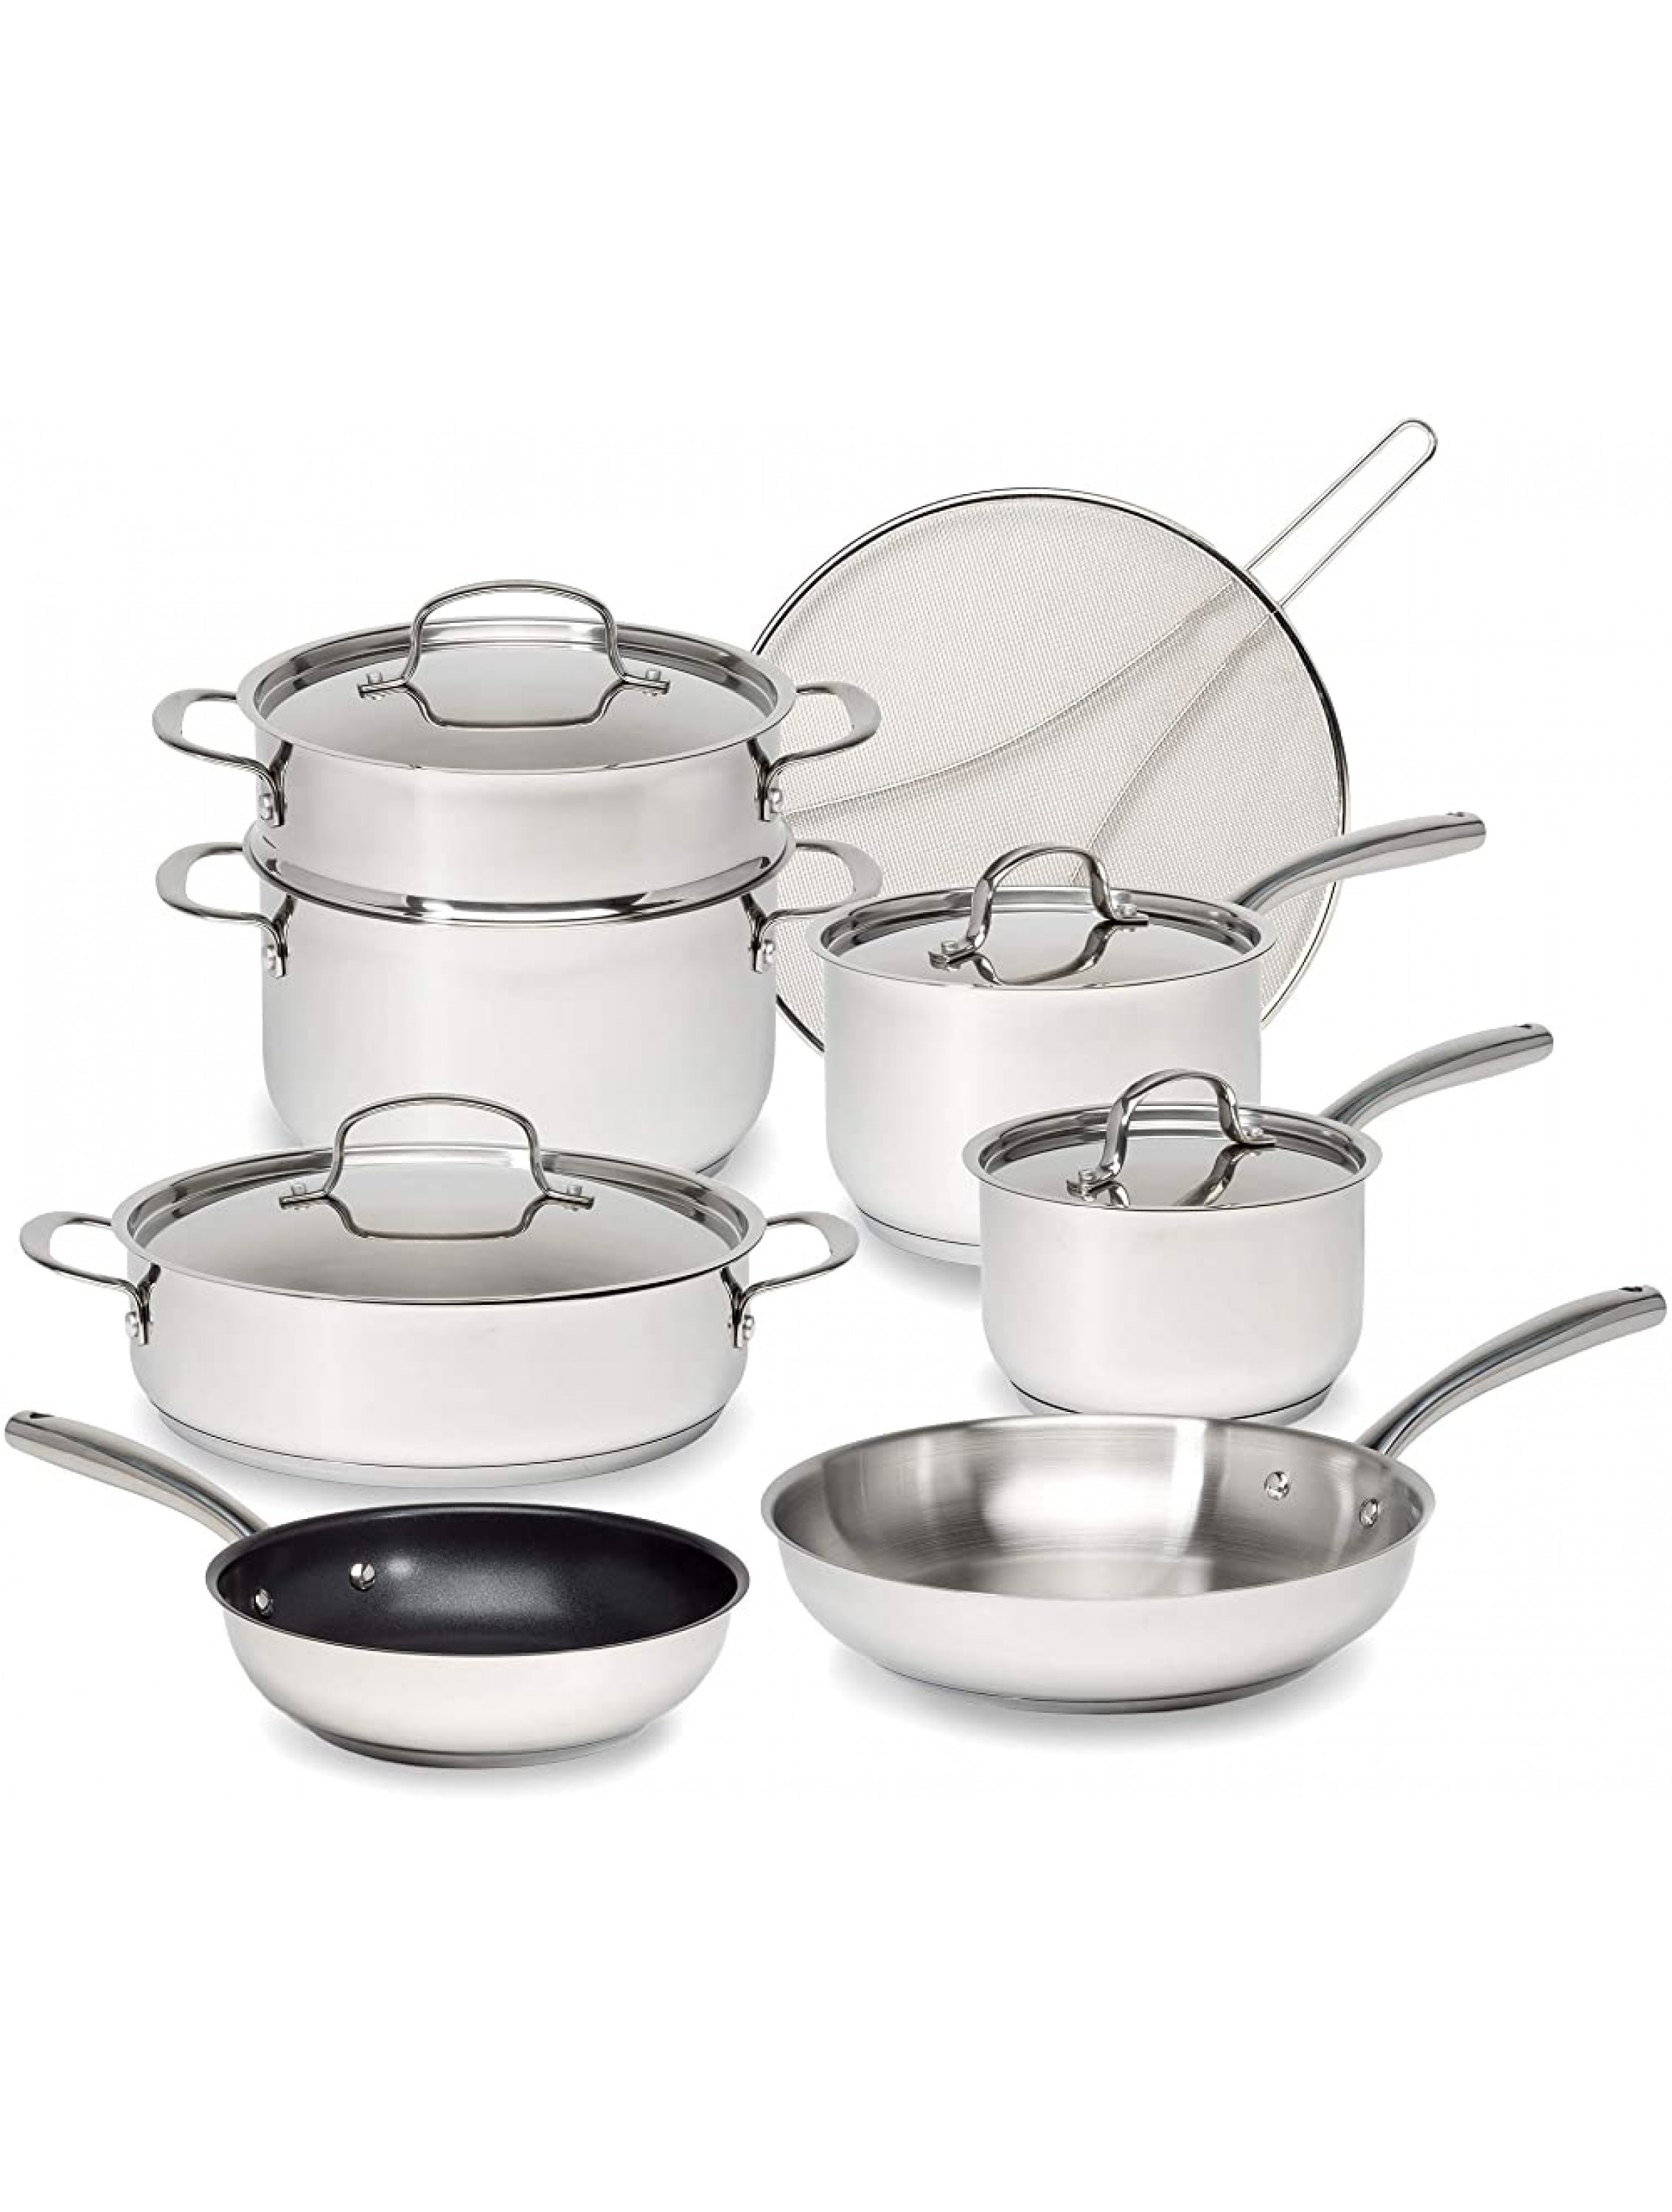 Goodful 12-Piece Classic Stainless Steel Cookware Set with Tri-Ply Base Impact Bonded Pots and Pans Dishwasher Safe - BICXY7UUP